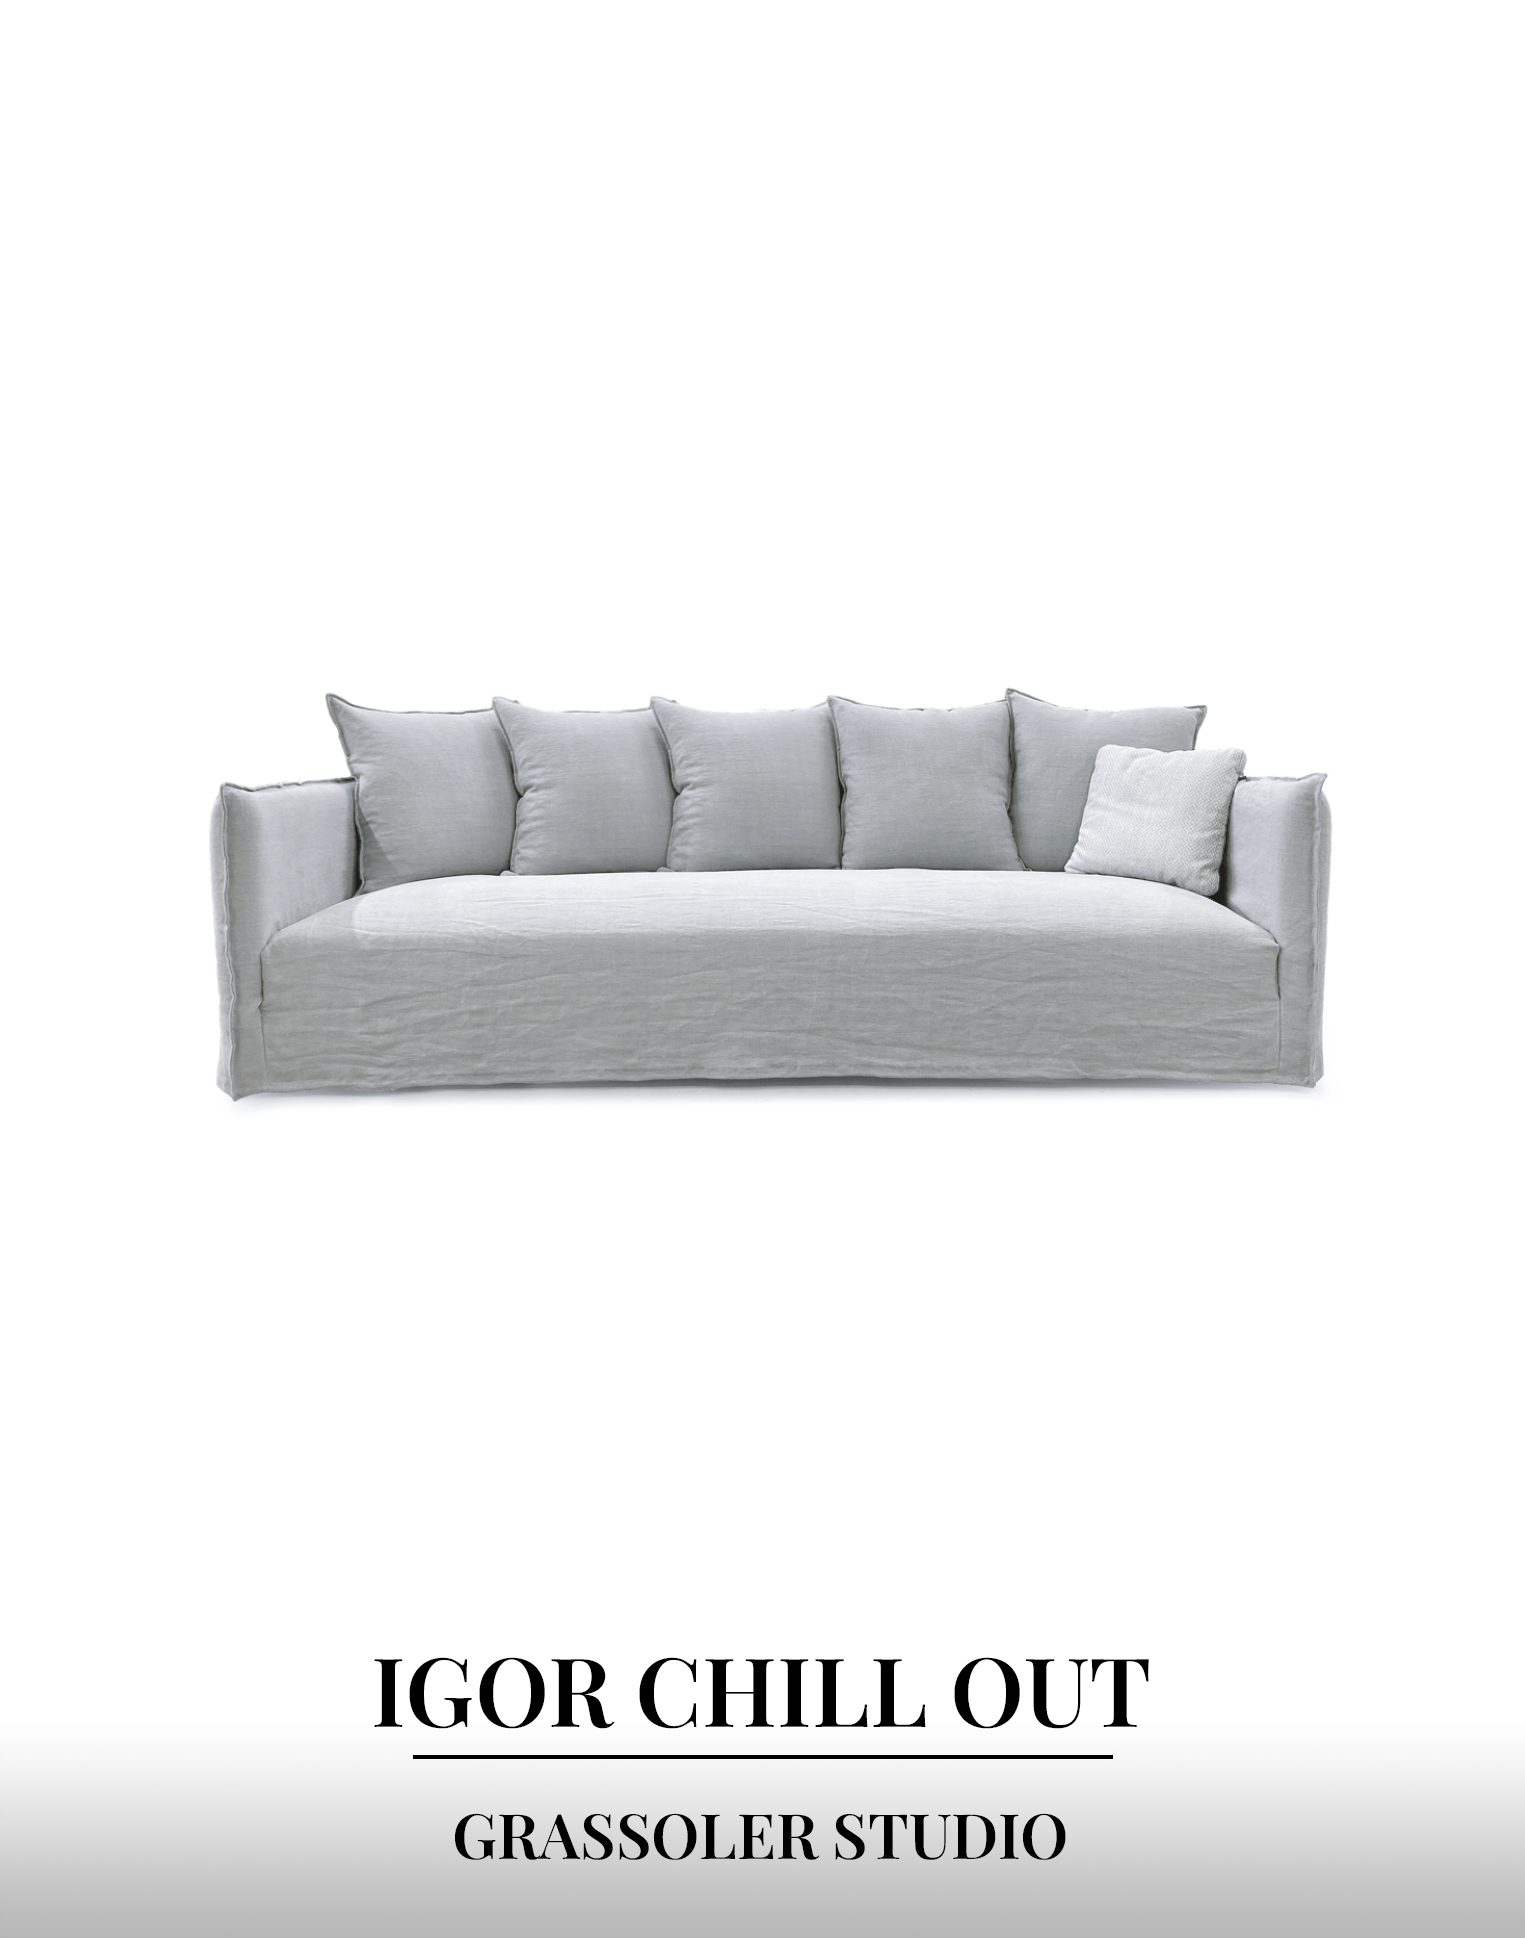 Igor Chill Out